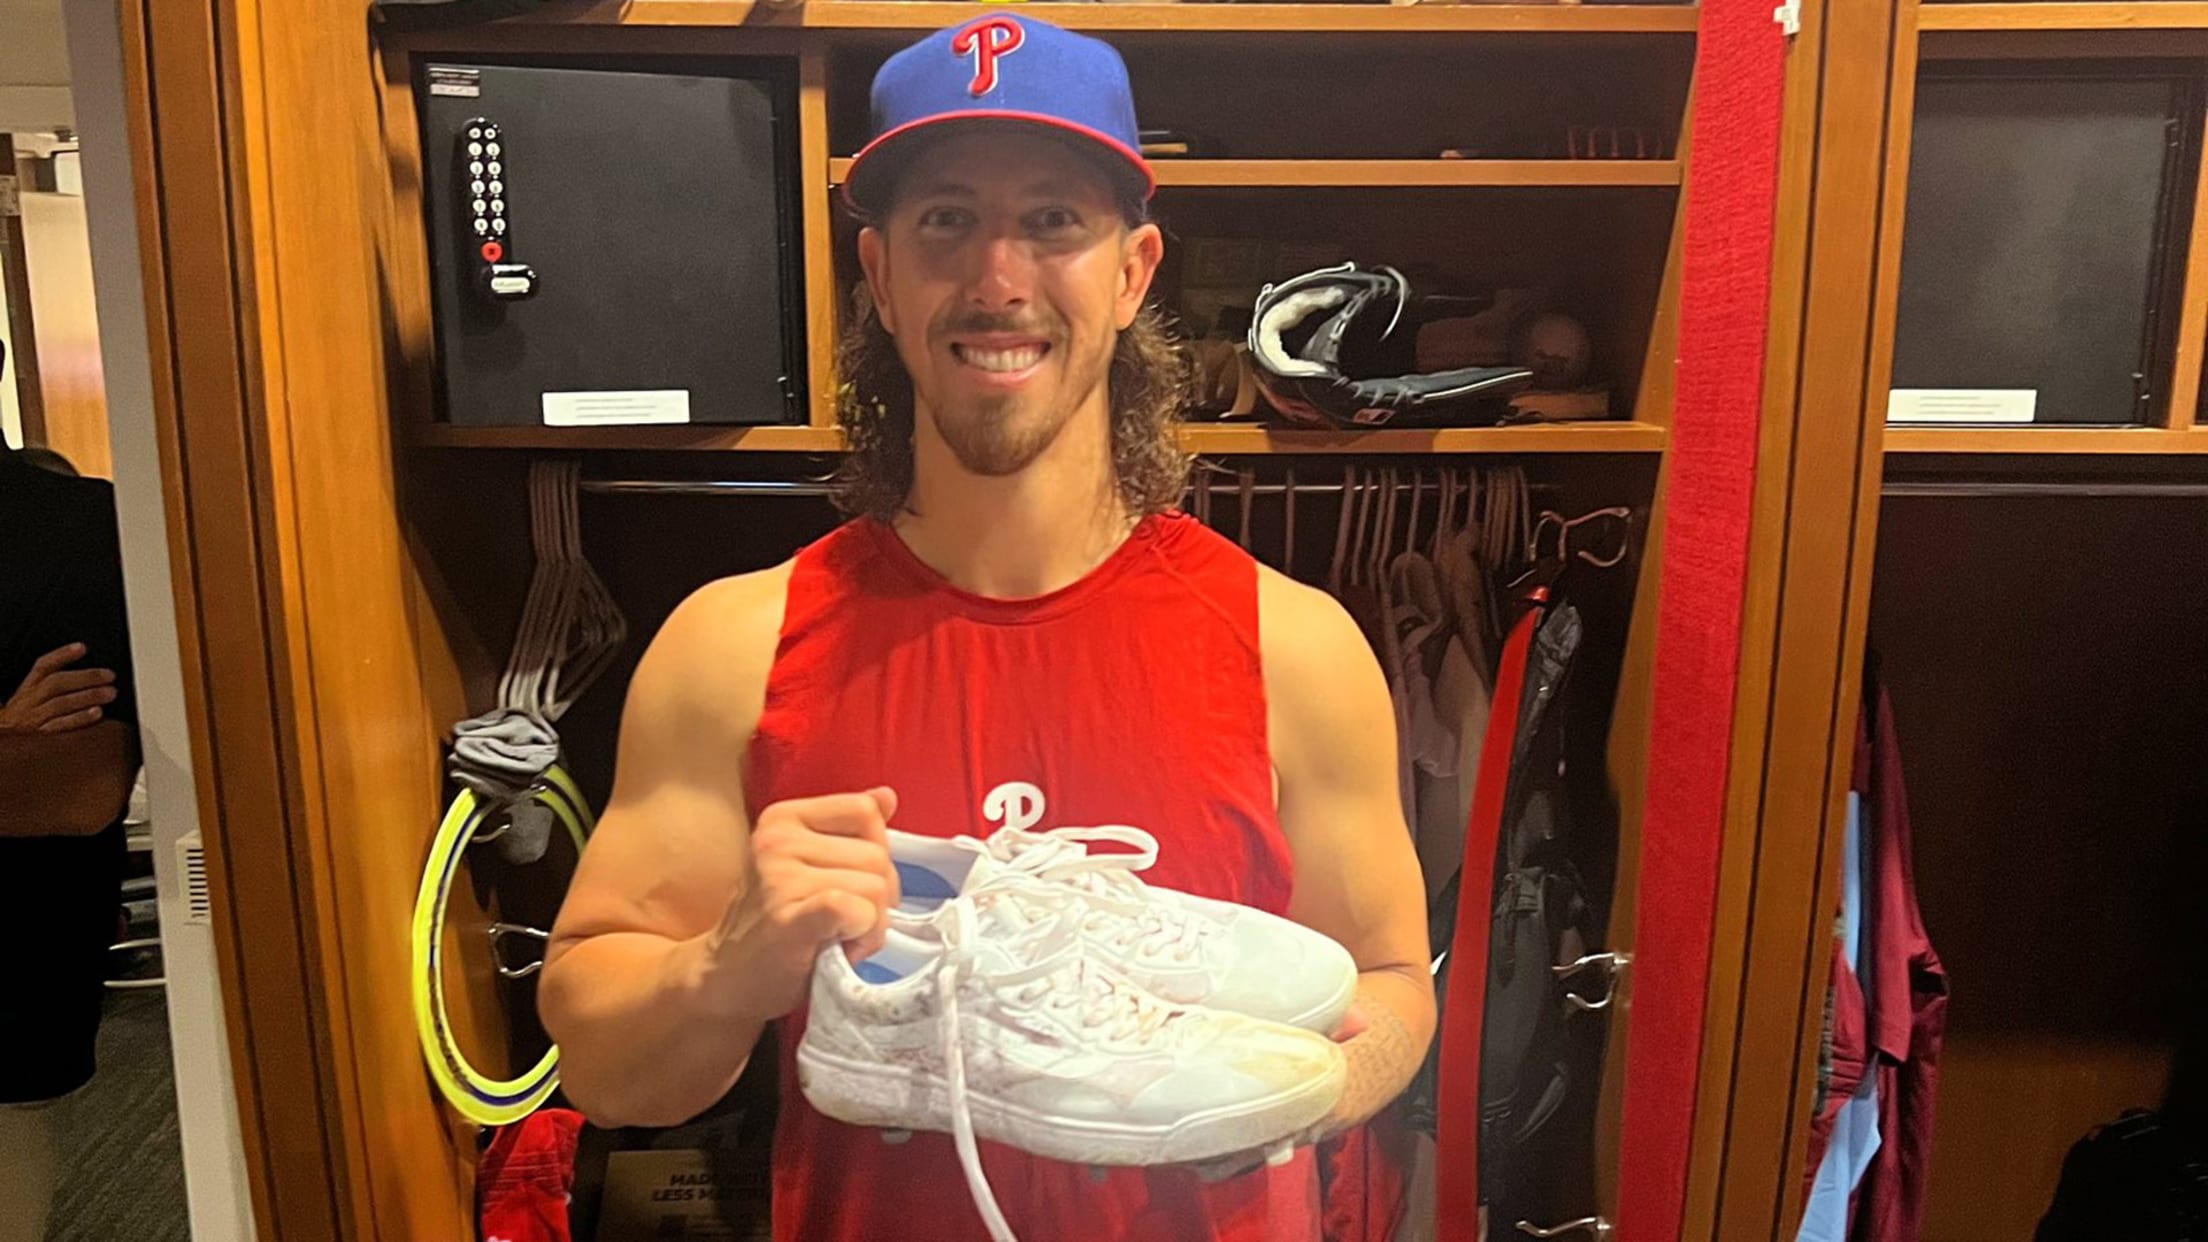 Michael Lorenzen holds up his white Vans cleats in the clubhouse